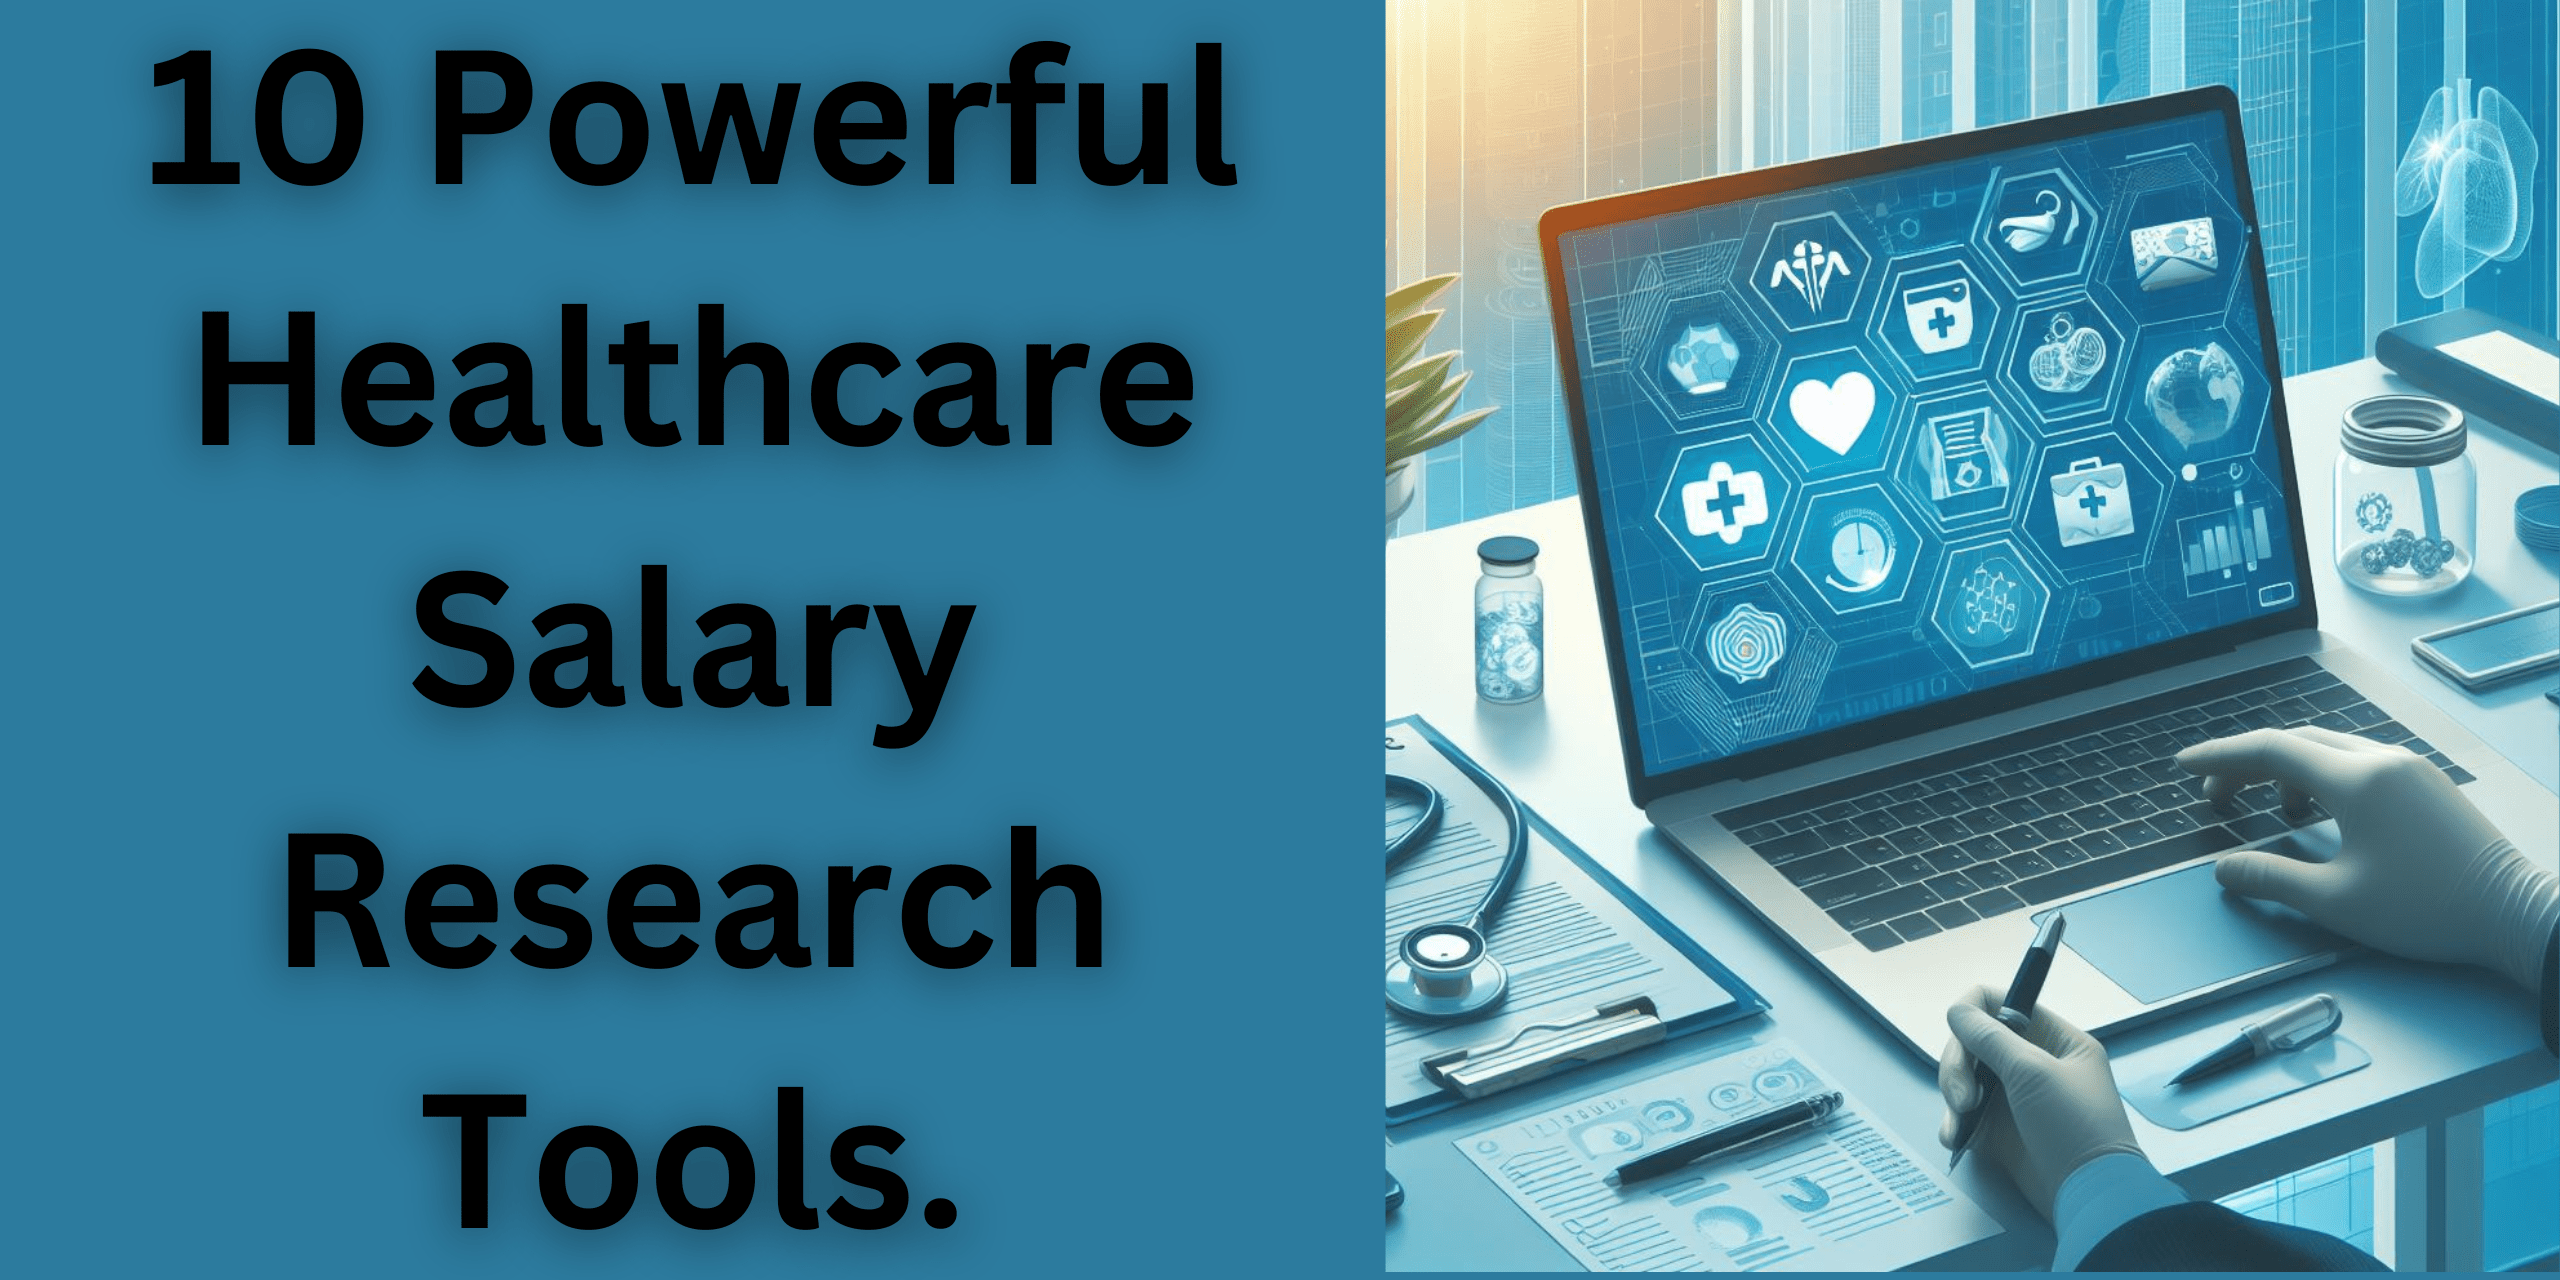 Alt="10 Powerful Healthcare Salary Research Tools"